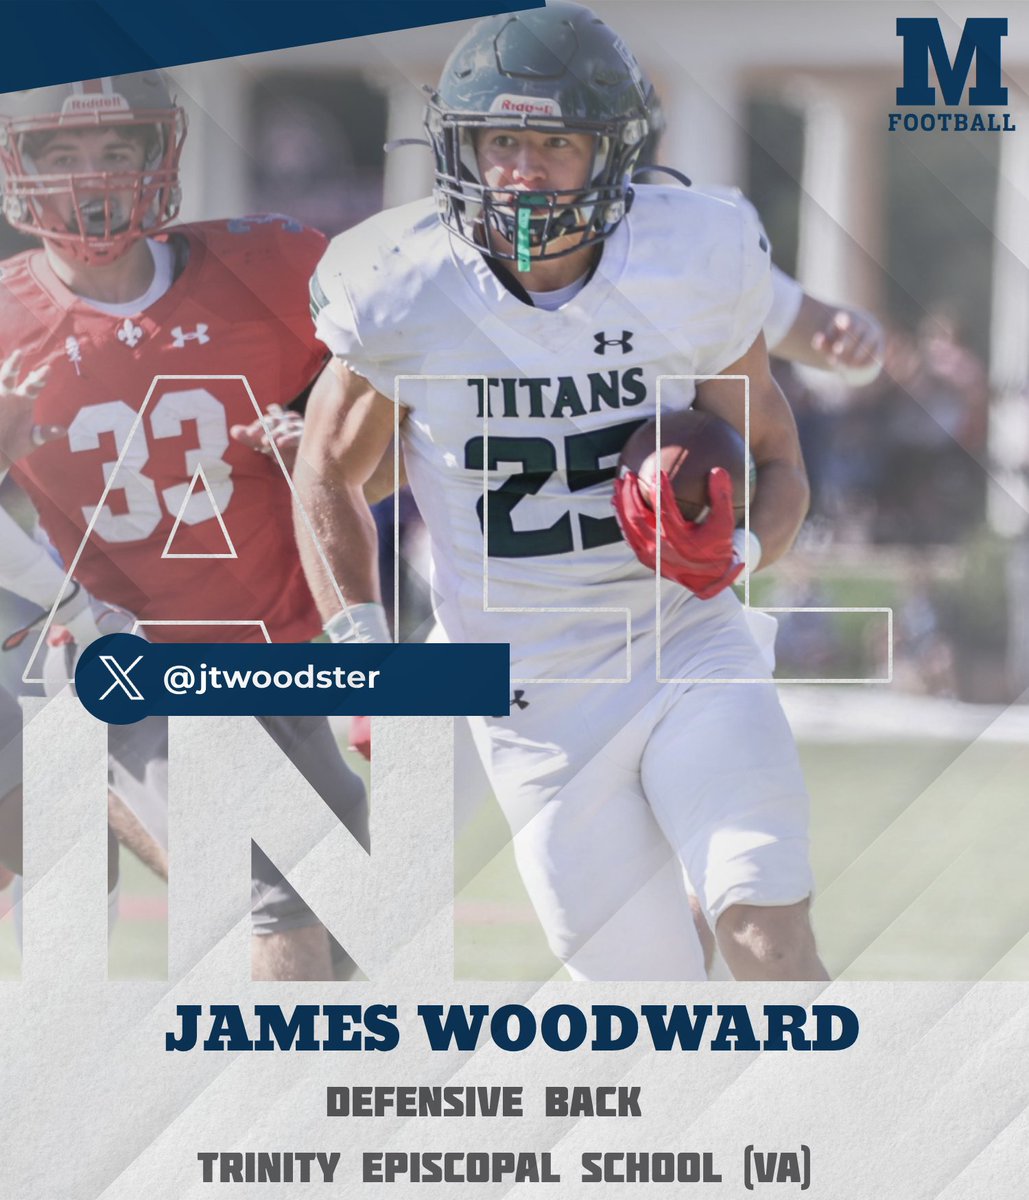 Welcome to the family James Woodward! #1-0